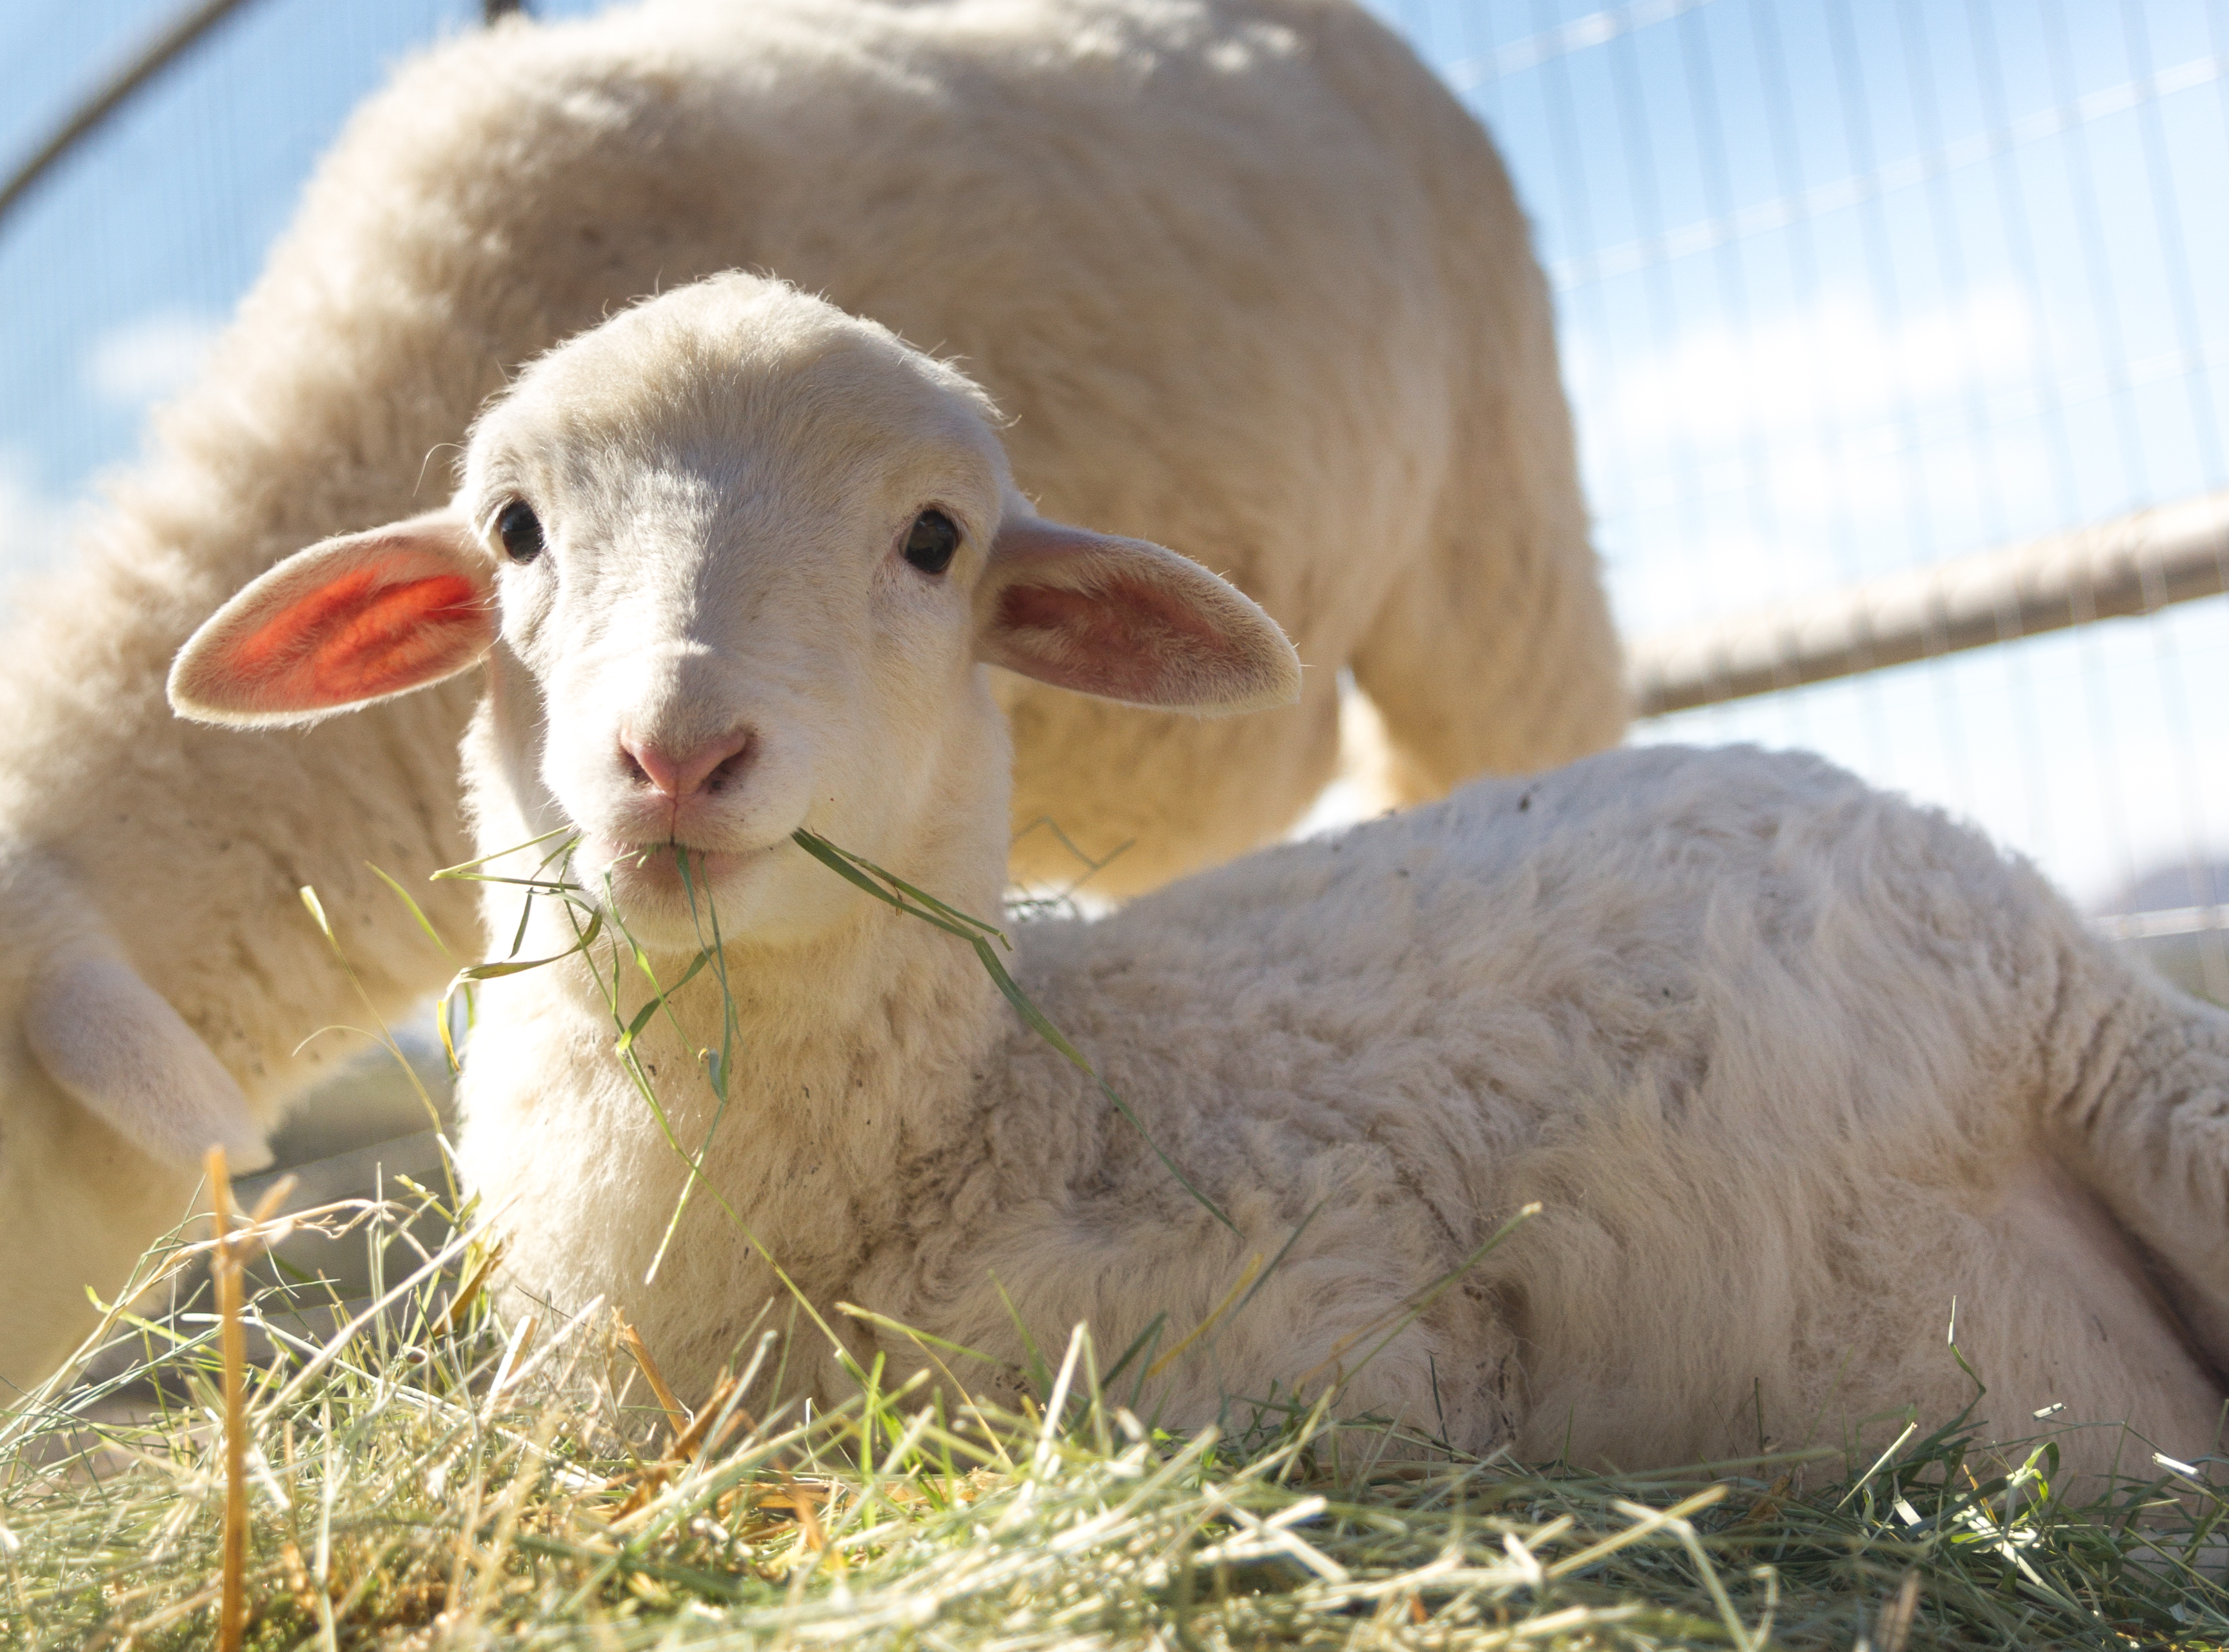 Want to save baby farm animals? This sanctuary needs your help - Wholesome  Culture - Blog